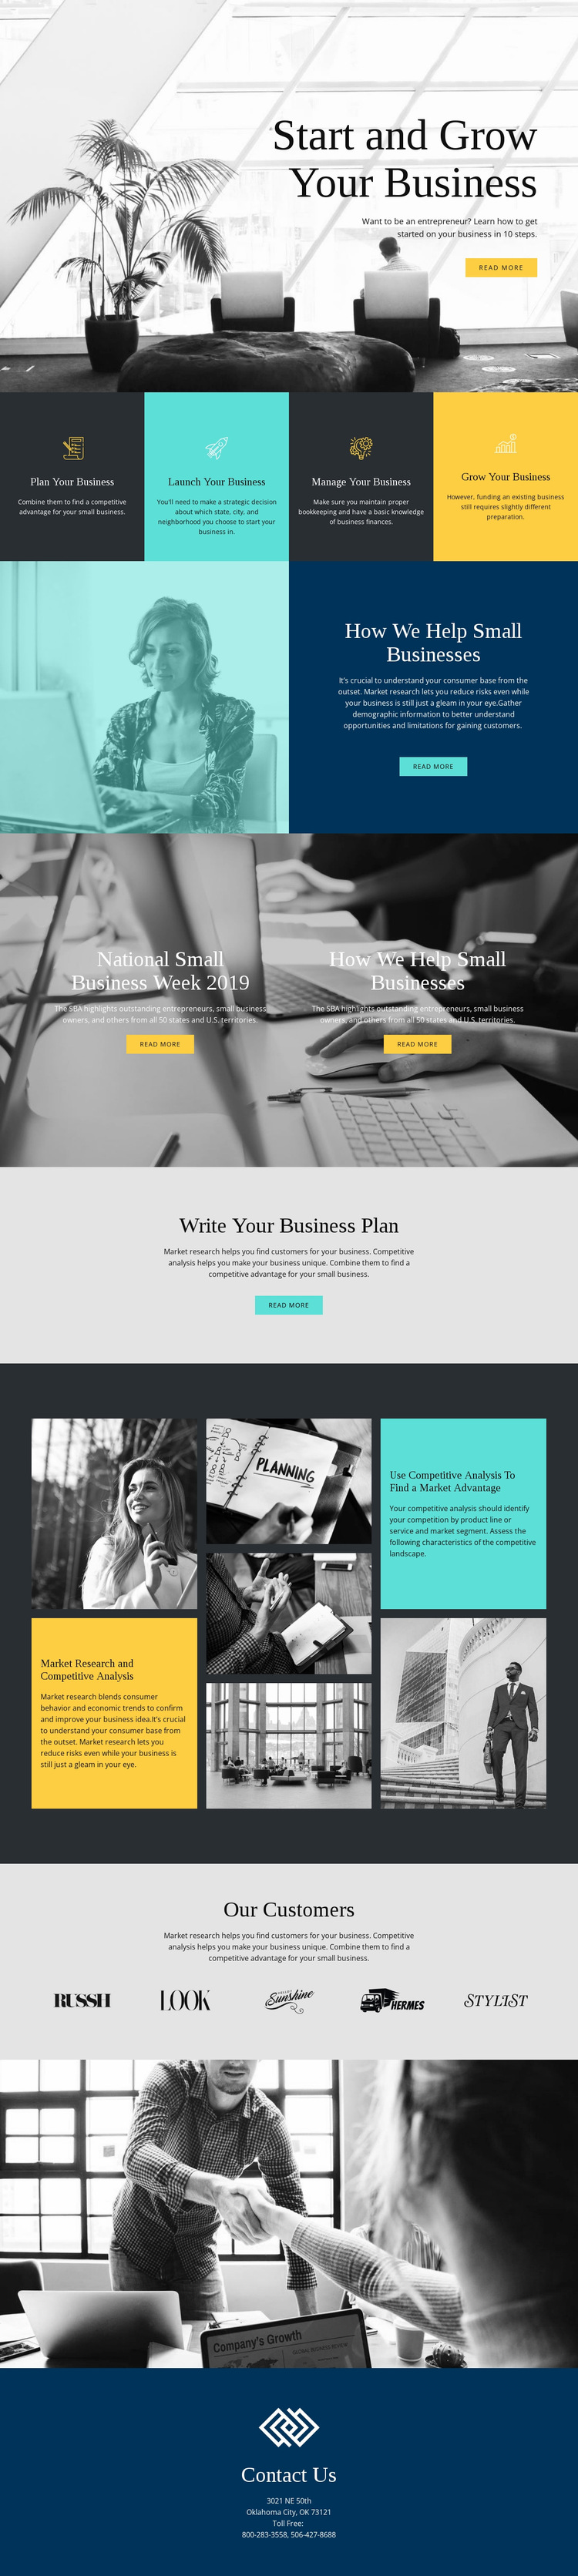 Start and grow your business Website Builder Templates